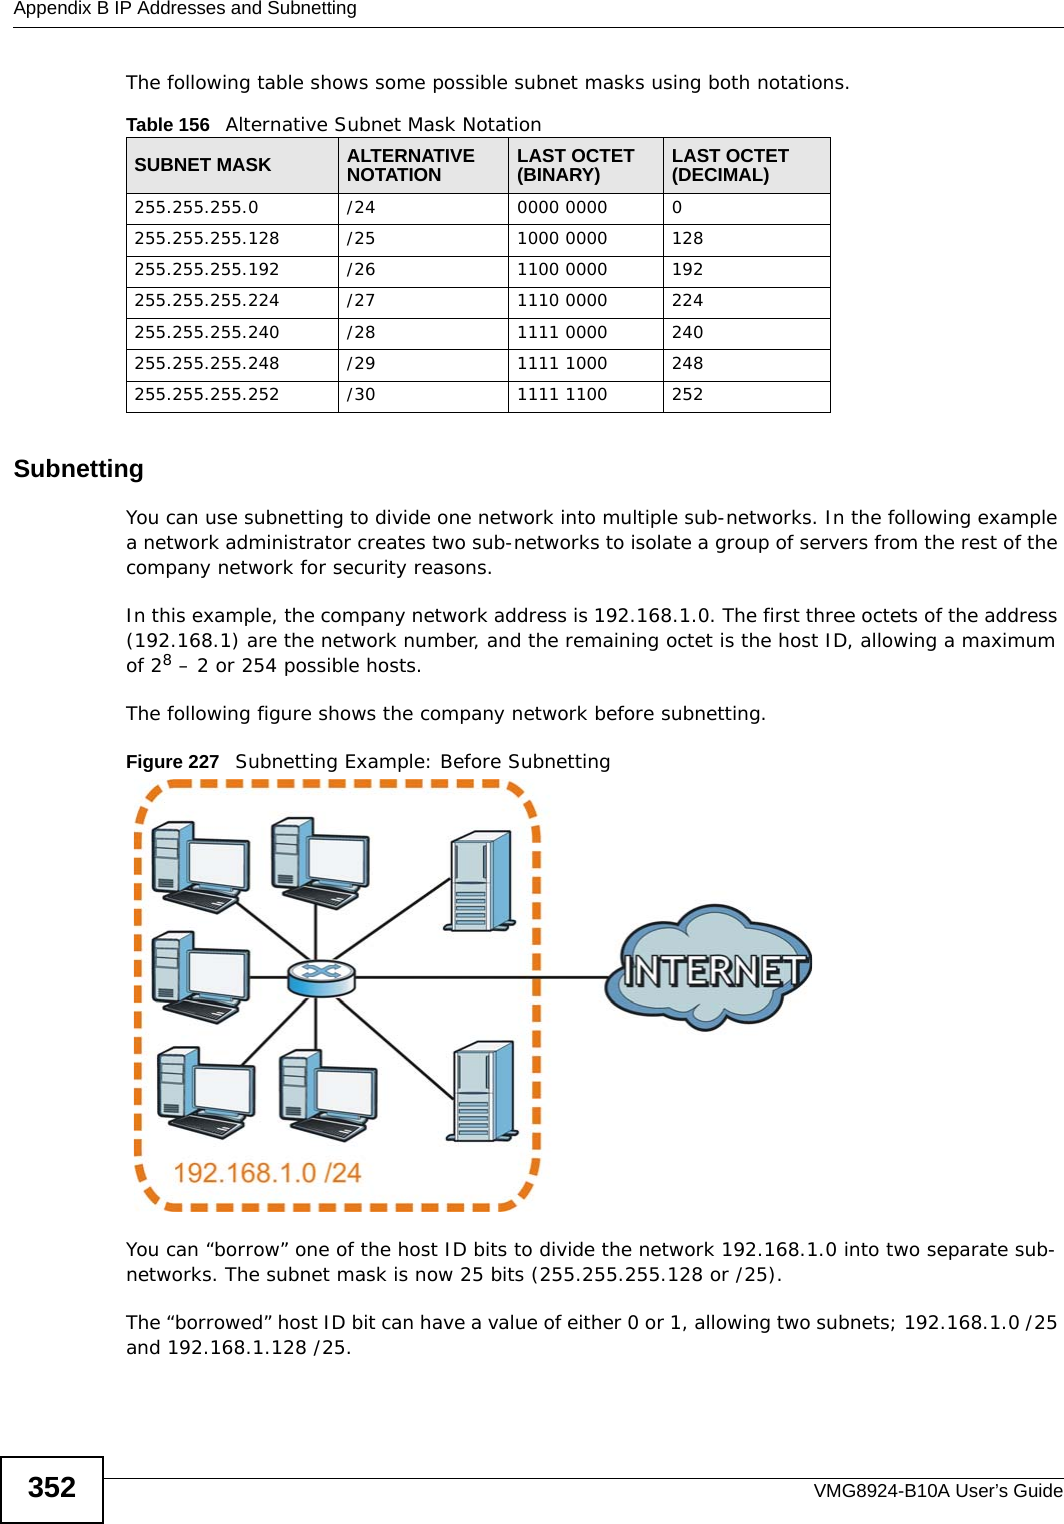 Appendix B IP Addresses and SubnettingVMG8924-B10A User’s Guide352The following table shows some possible subnet masks using both notations. SubnettingYou can use subnetting to divide one network into multiple sub-networks. In the following example a network administrator creates two sub-networks to isolate a group of servers from the rest of the company network for security reasons.In this example, the company network address is 192.168.1.0. The first three octets of the address (192.168.1) are the network number, and the remaining octet is the host ID, allowing a maximum of 28 – 2 or 254 possible hosts.The following figure shows the company network before subnetting.  Figure 227   Subnetting Example: Before SubnettingYou can “borrow” one of the host ID bits to divide the network 192.168.1.0 into two separate sub-networks. The subnet mask is now 25 bits (255.255.255.128 or /25).The “borrowed” host ID bit can have a value of either 0 or 1, allowing two subnets; 192.168.1.0 /25 and 192.168.1.128 /25. Table 156   Alternative Subnet Mask NotationSUBNET MASK ALTERNATIVE NOTATION LAST OCTET (BINARY) LAST OCTET (DECIMAL)255.255.255.0 /24 0000 0000 0255.255.255.128 /25 1000 0000 128255.255.255.192 /26 1100 0000 192255.255.255.224 /27 1110 0000 224255.255.255.240 /28 1111 0000 240255.255.255.248 /29 1111 1000 248255.255.255.252 /30 1111 1100 252